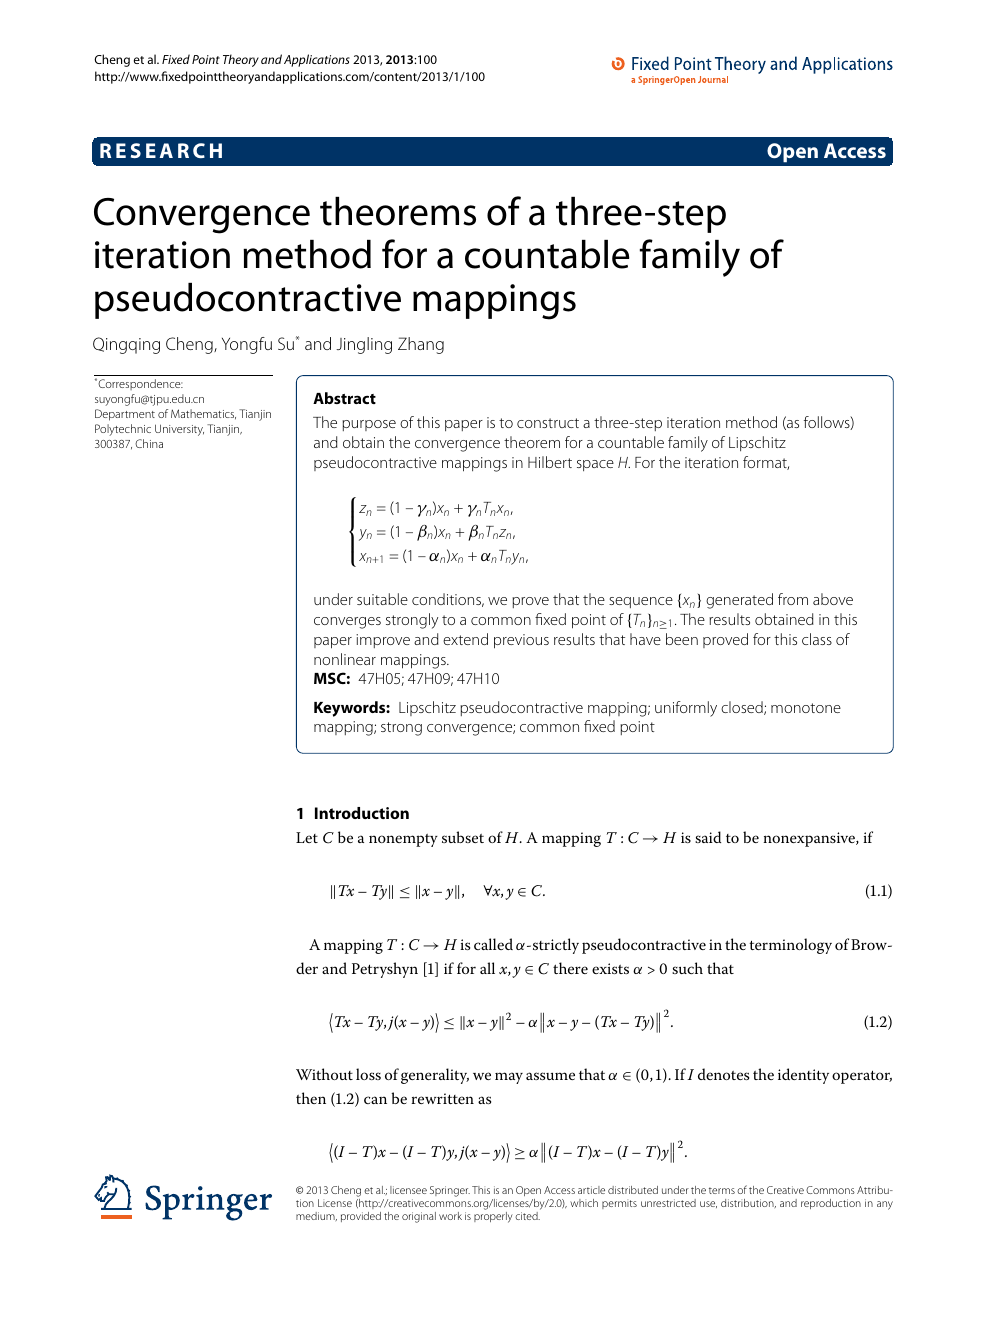 Convergence Theorems Of A Three Step Iteration Method For A Countable Family Of Pseudocontractive Mappings Topic Of Research Paper In Mathematics Download Scholarly Article Pdf And Read For Free On Cyberleninka Open